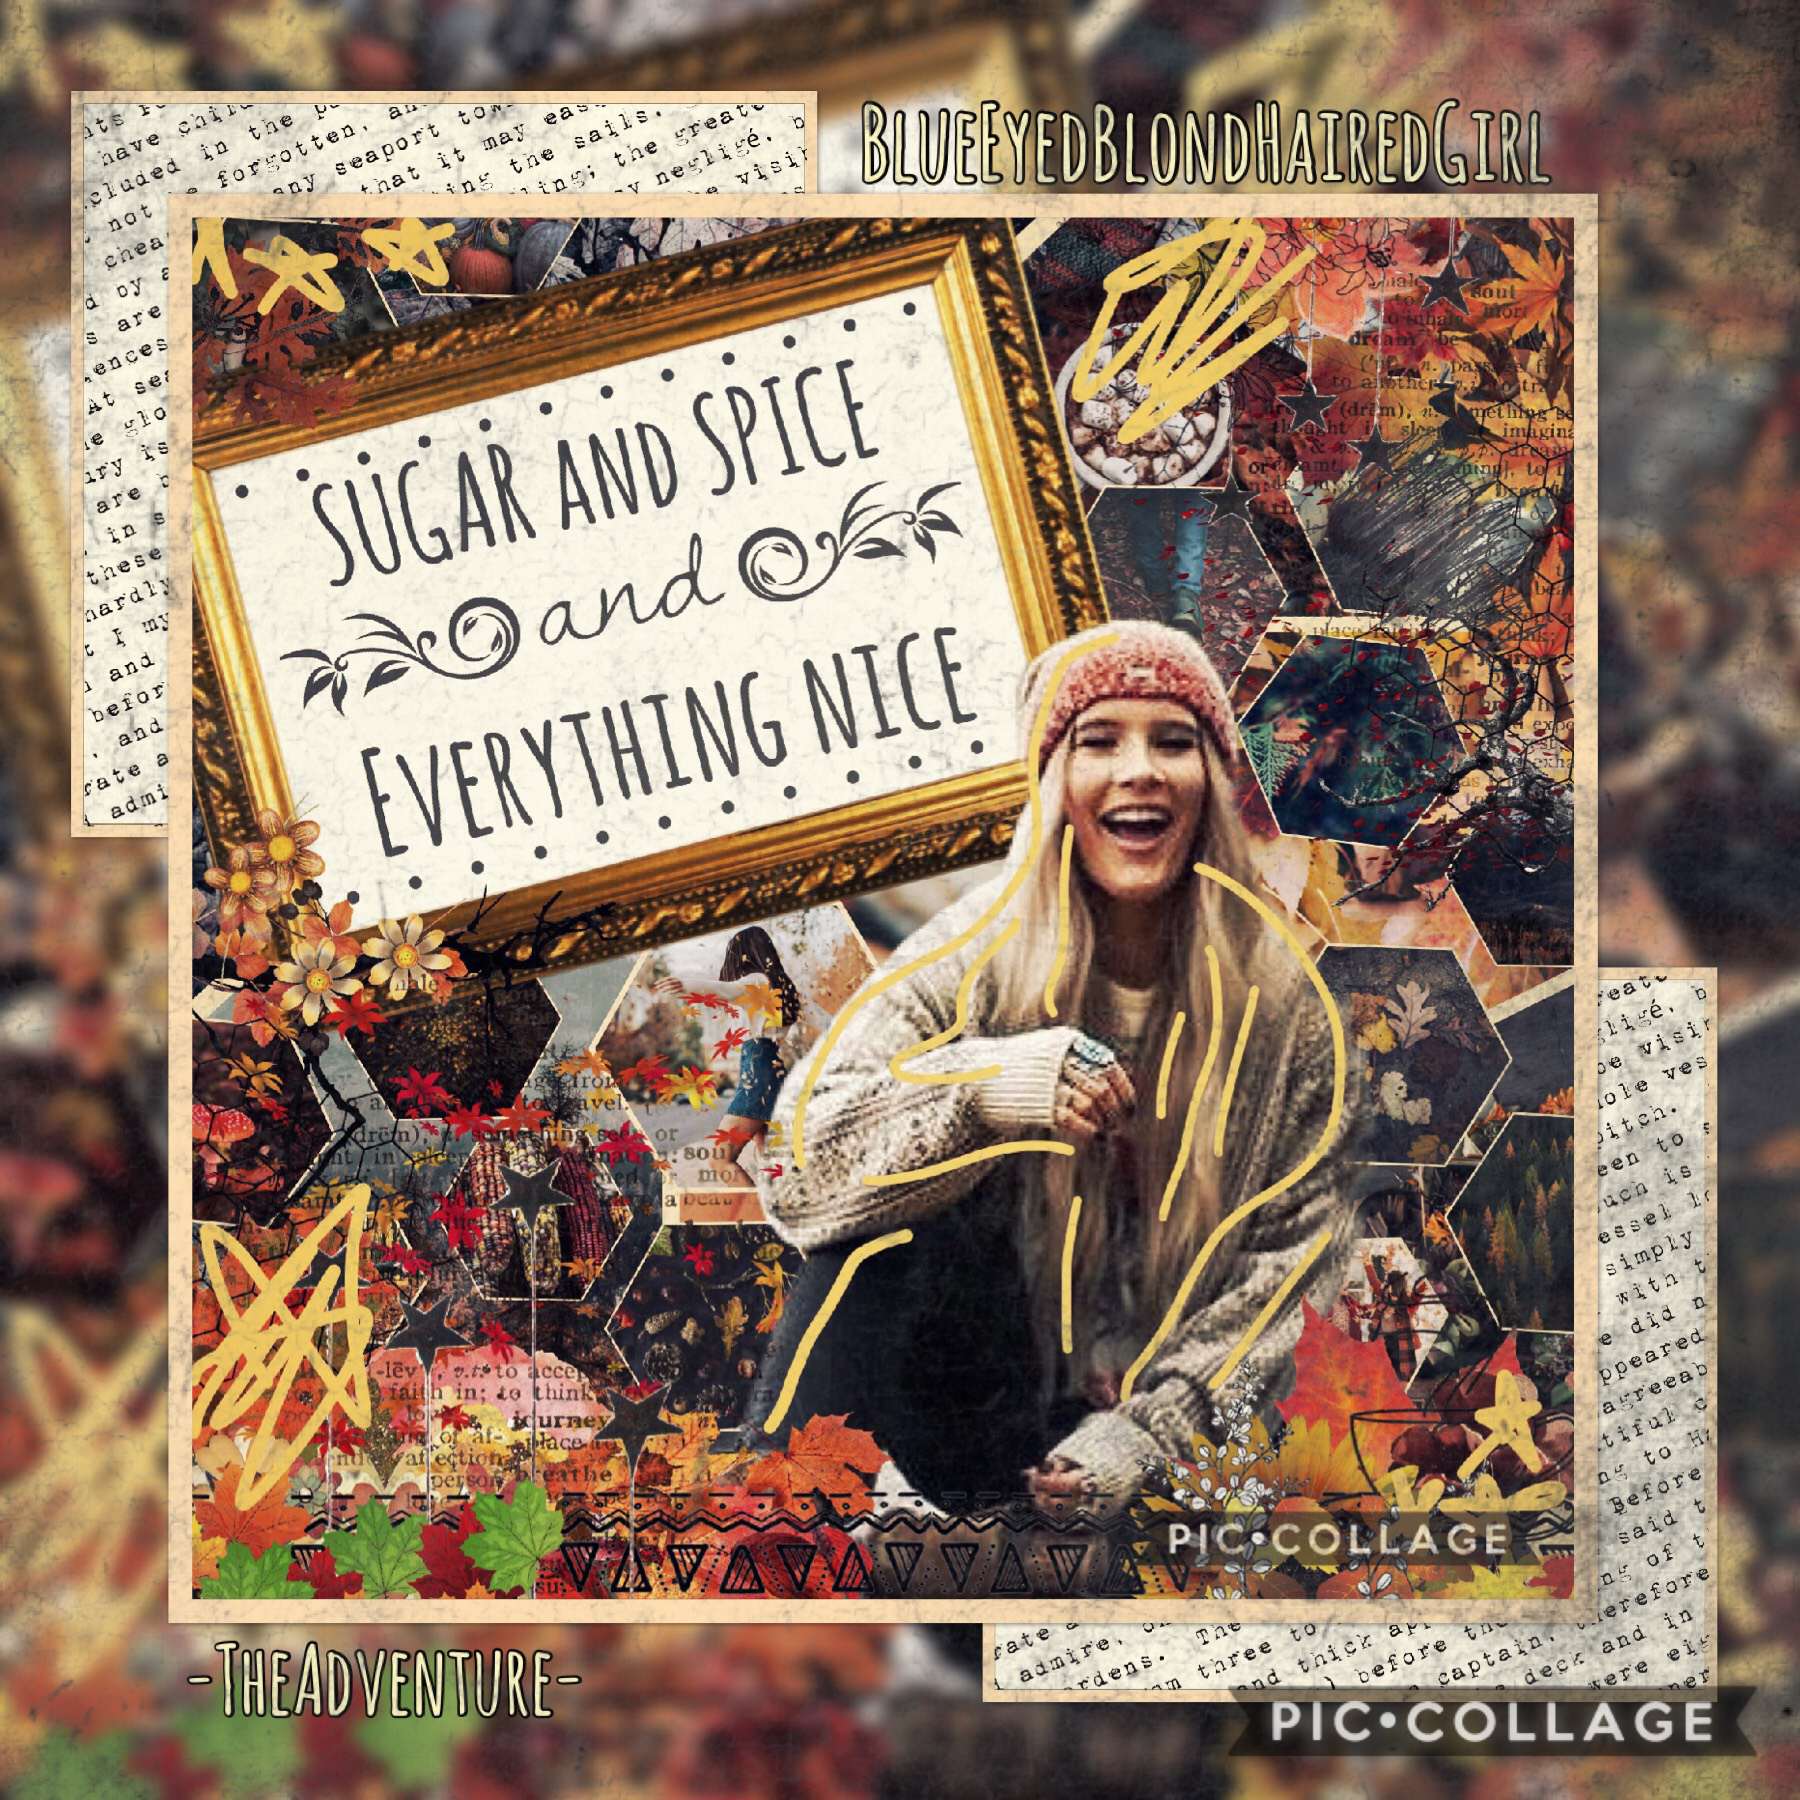 Collab with the AMAZING...TAP
BlueEyedBlondHairedGirl!! Go follow her NOW!😂😆😆😱 We did a fall theme!
QOTD: hot cocoa or chocolate milk?
AOTD: hot cocoa!!☕️